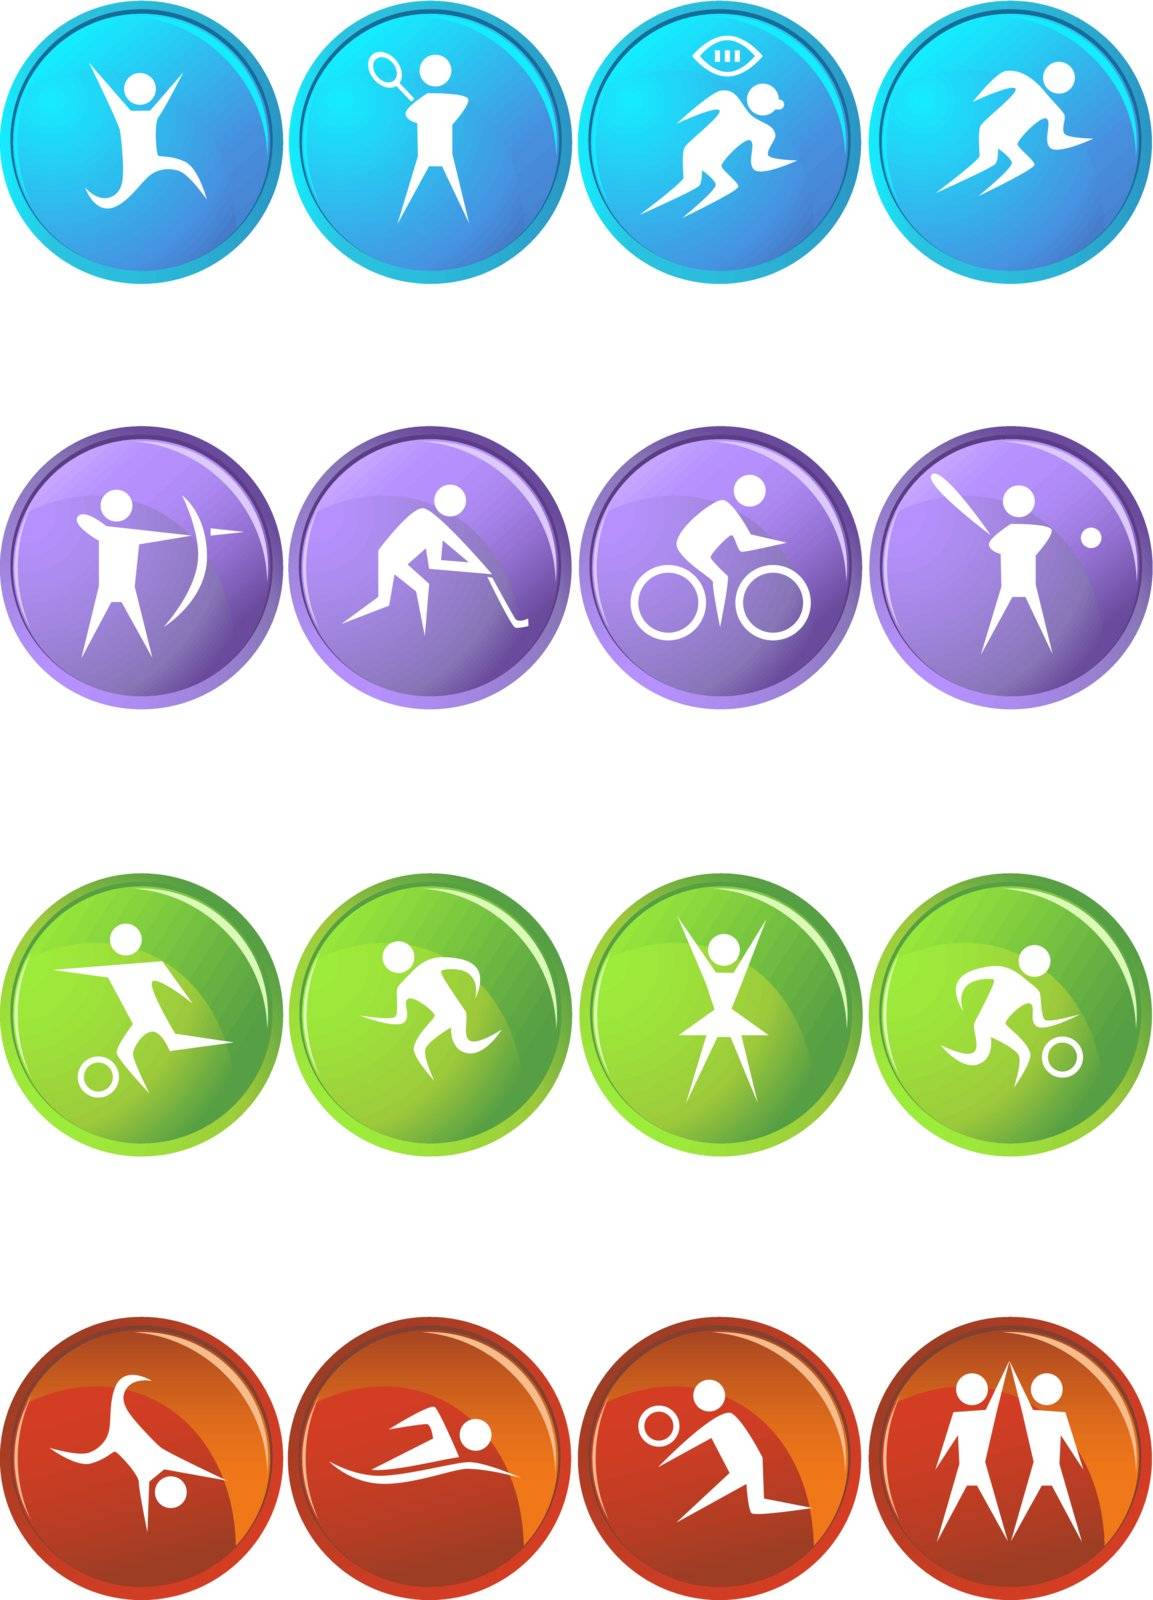 A set of athlete icons.